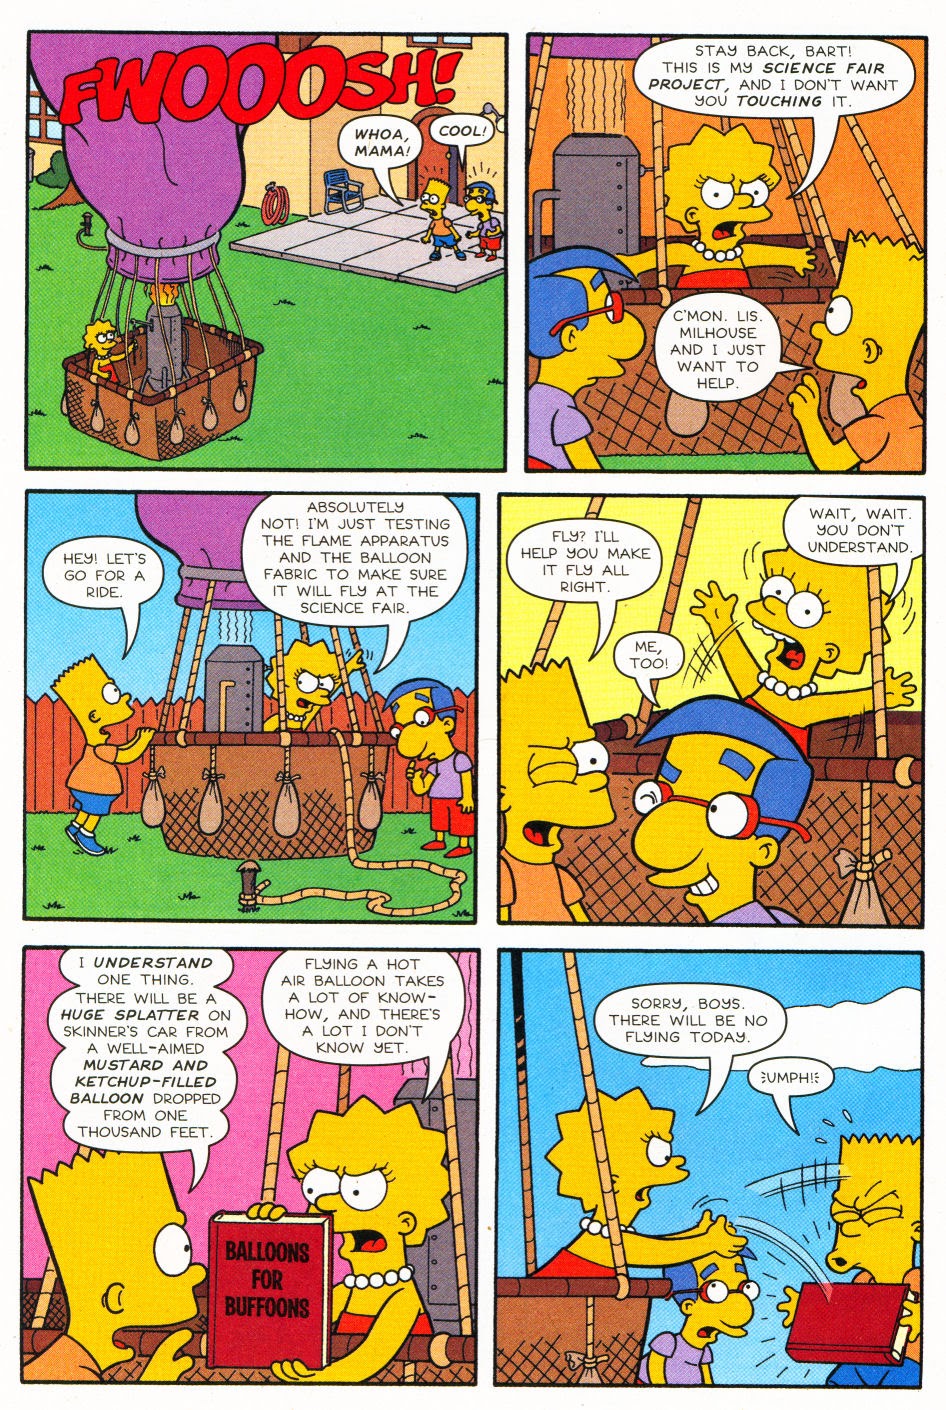 Read online Bart Simpson comic -  Issue #27 - 3